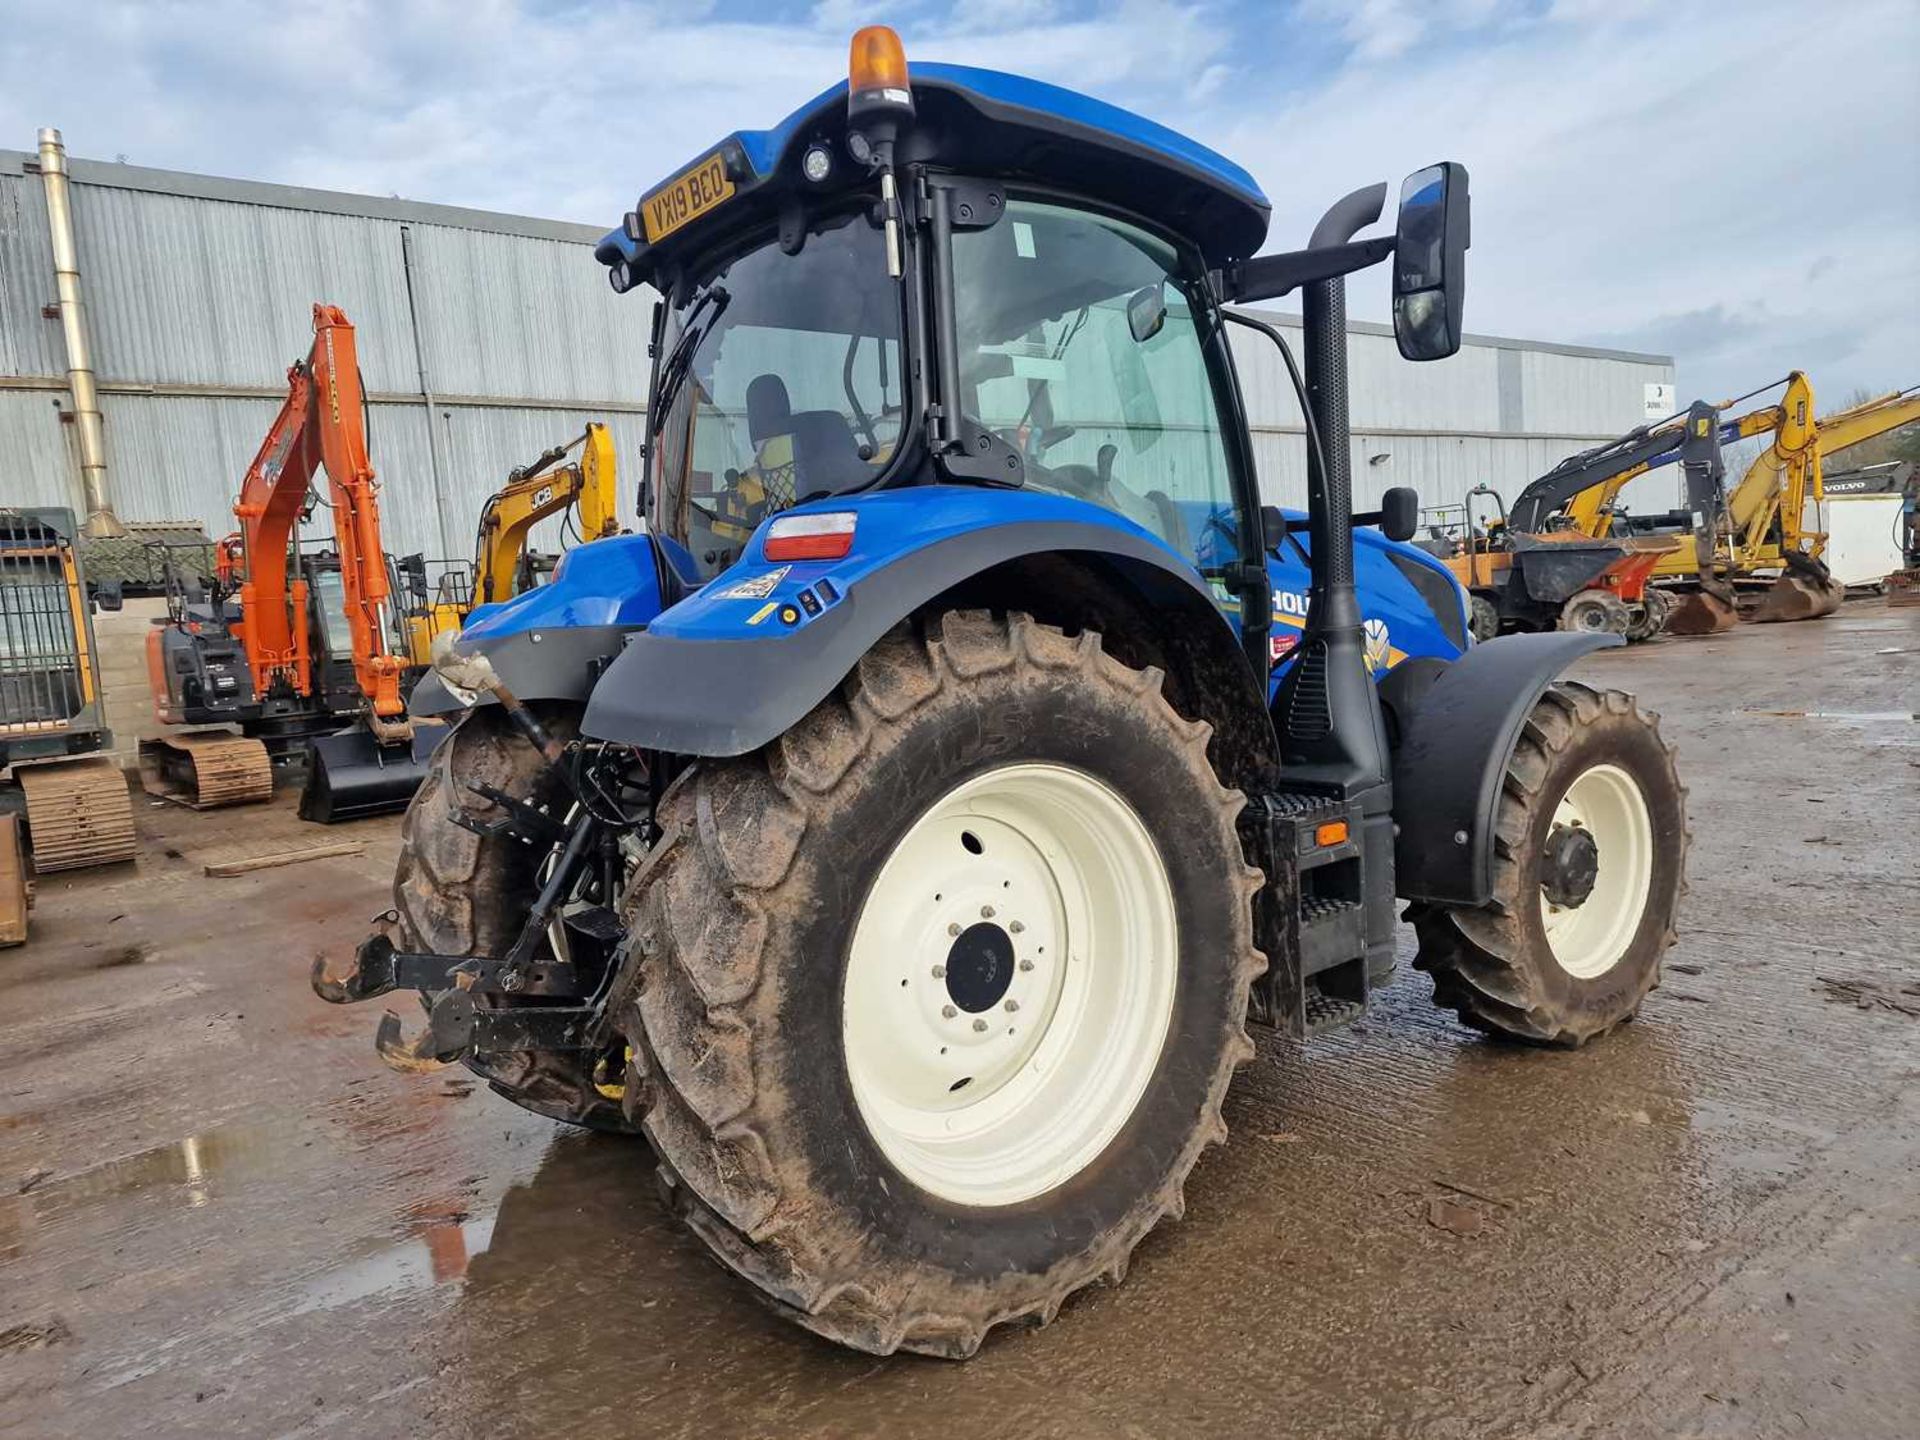 2019 New Holland T6.180 4WD Tractor, Cab Suspension, 3 Spool Valves, Push Out Hitch, A/C - Image 6 of 28